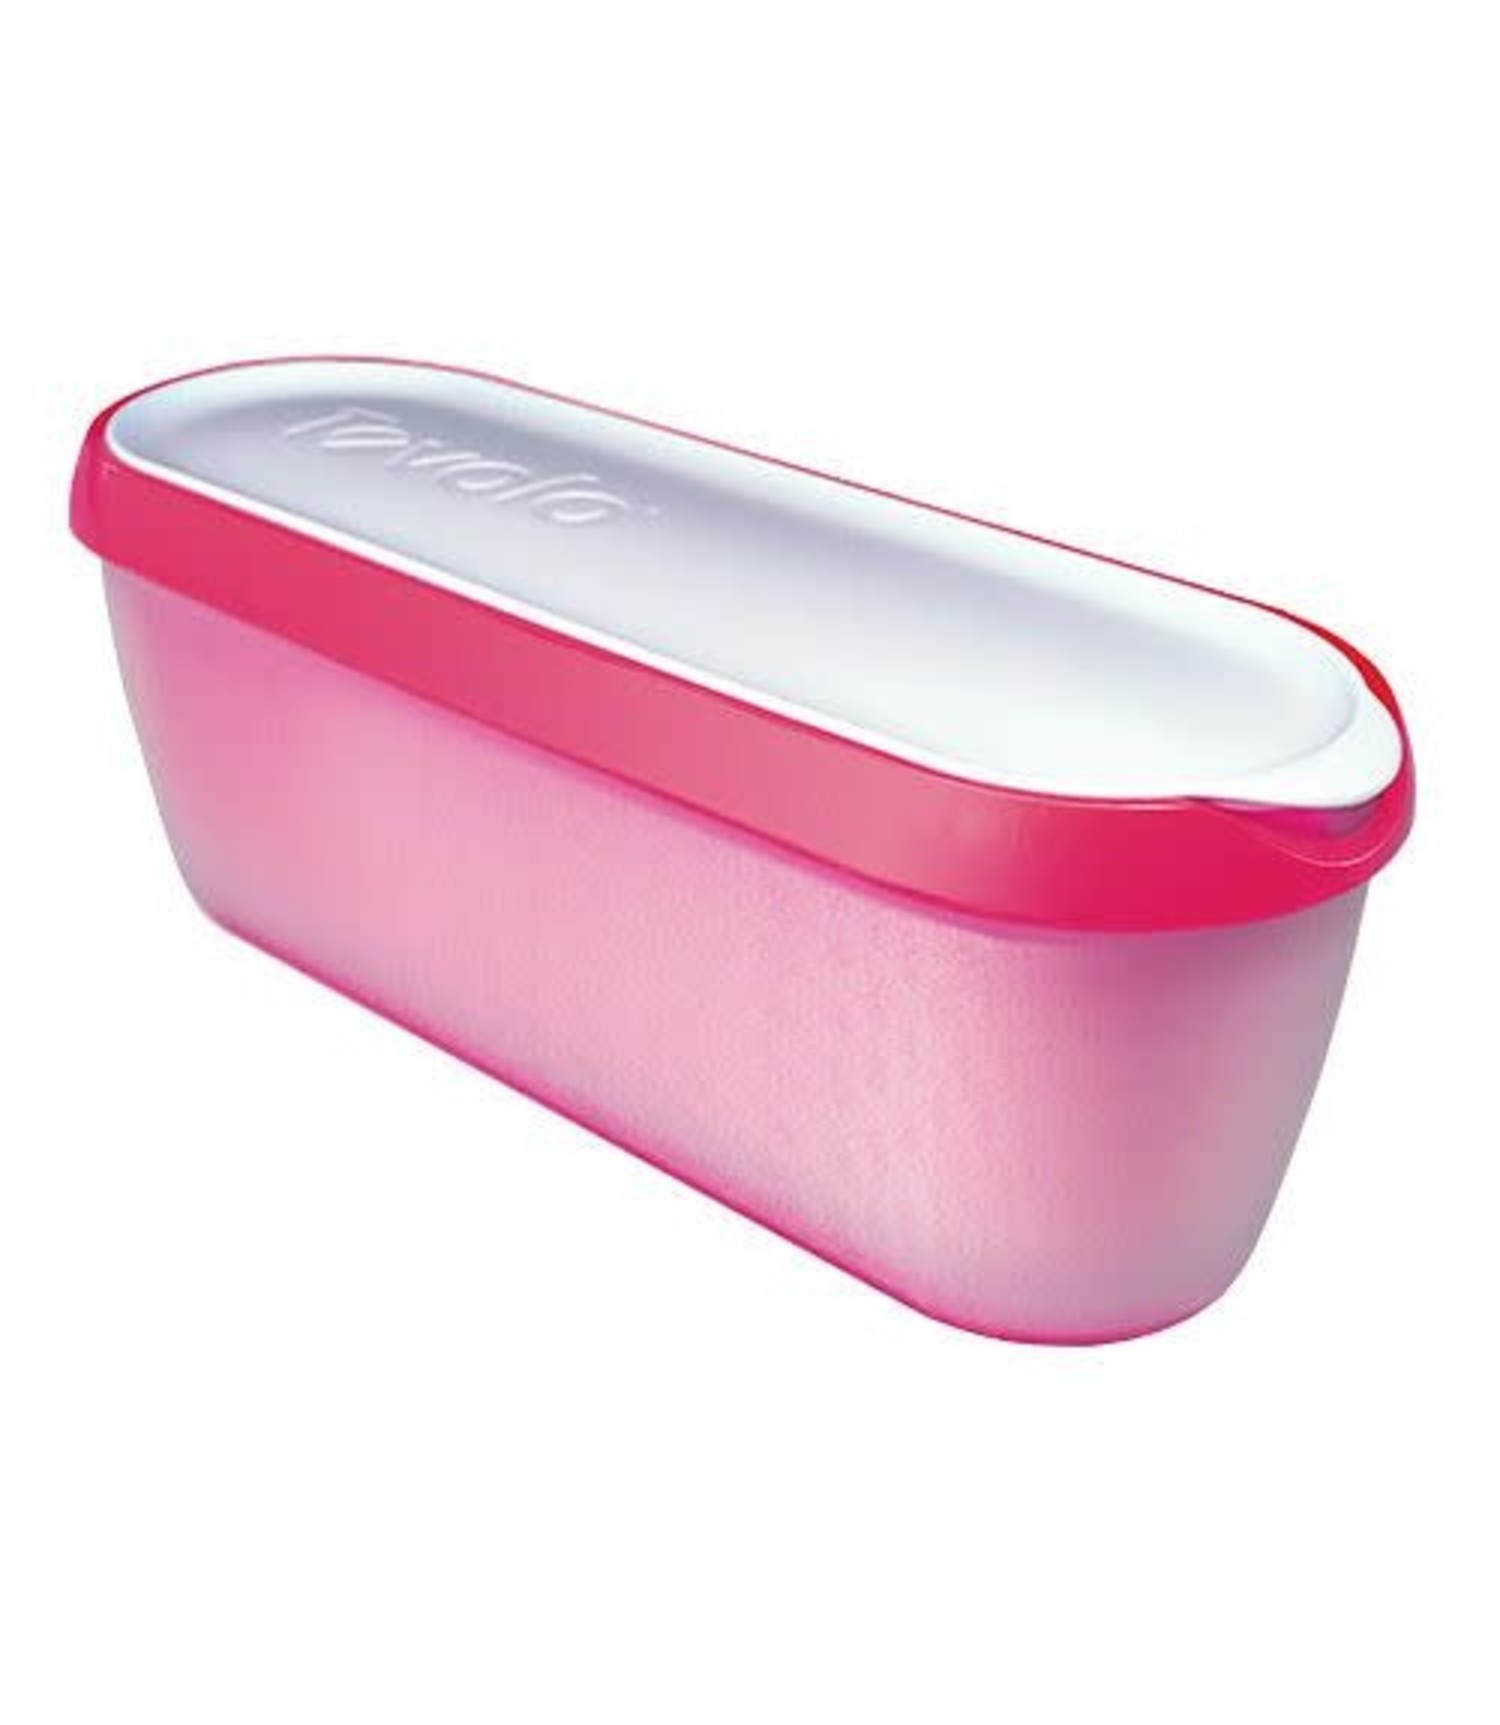 Hot Buy 3 Reusable Storage Containers for Your Homemade Ice Cream, homemade  ice cream container